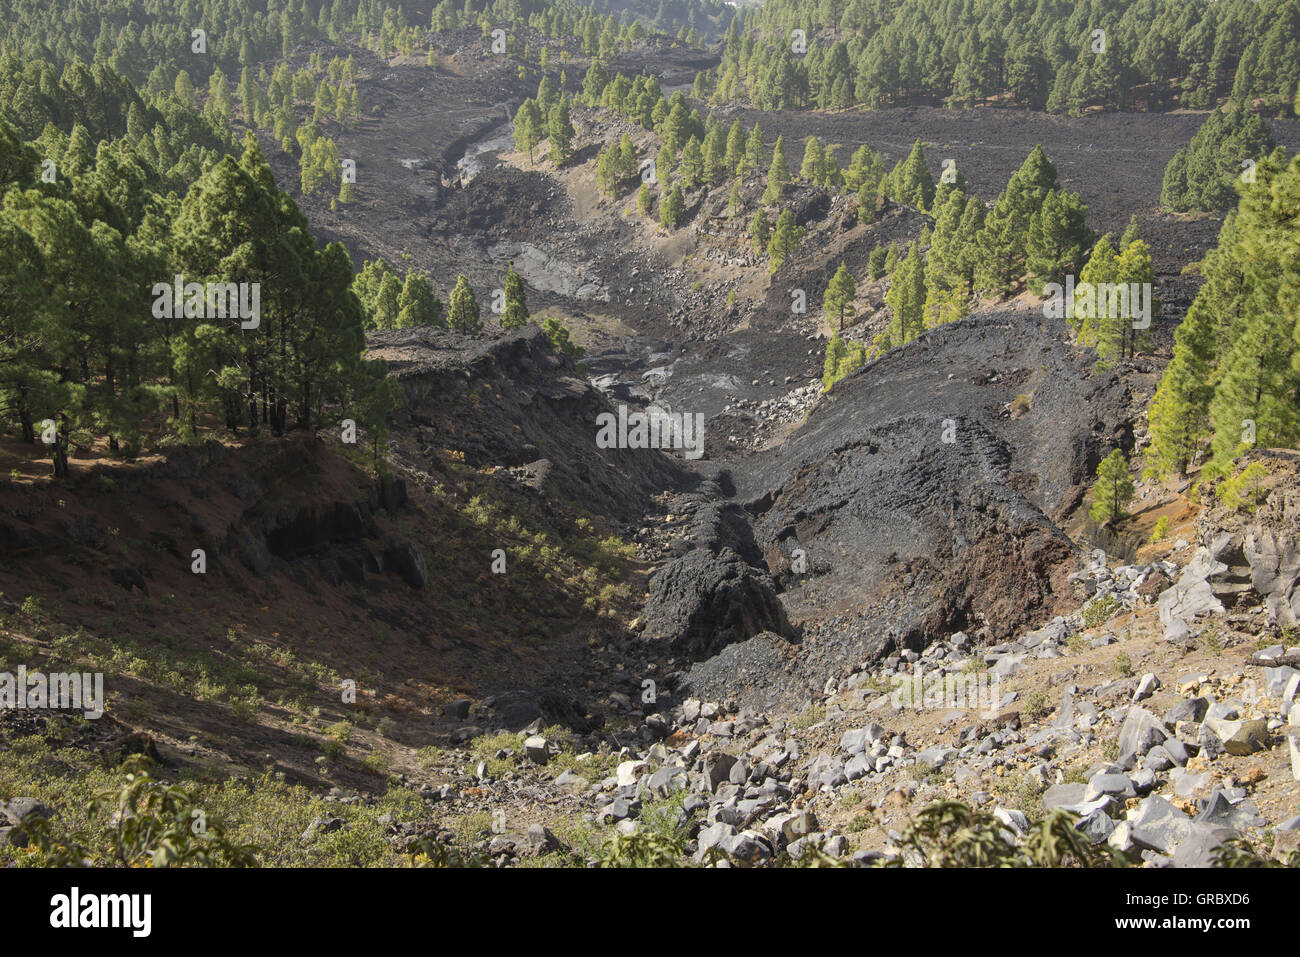 View Over The Crusted Lava Field Of San Juan, National Parc Cumbre Vieja, La Palma, Canary Islands Stock Photo